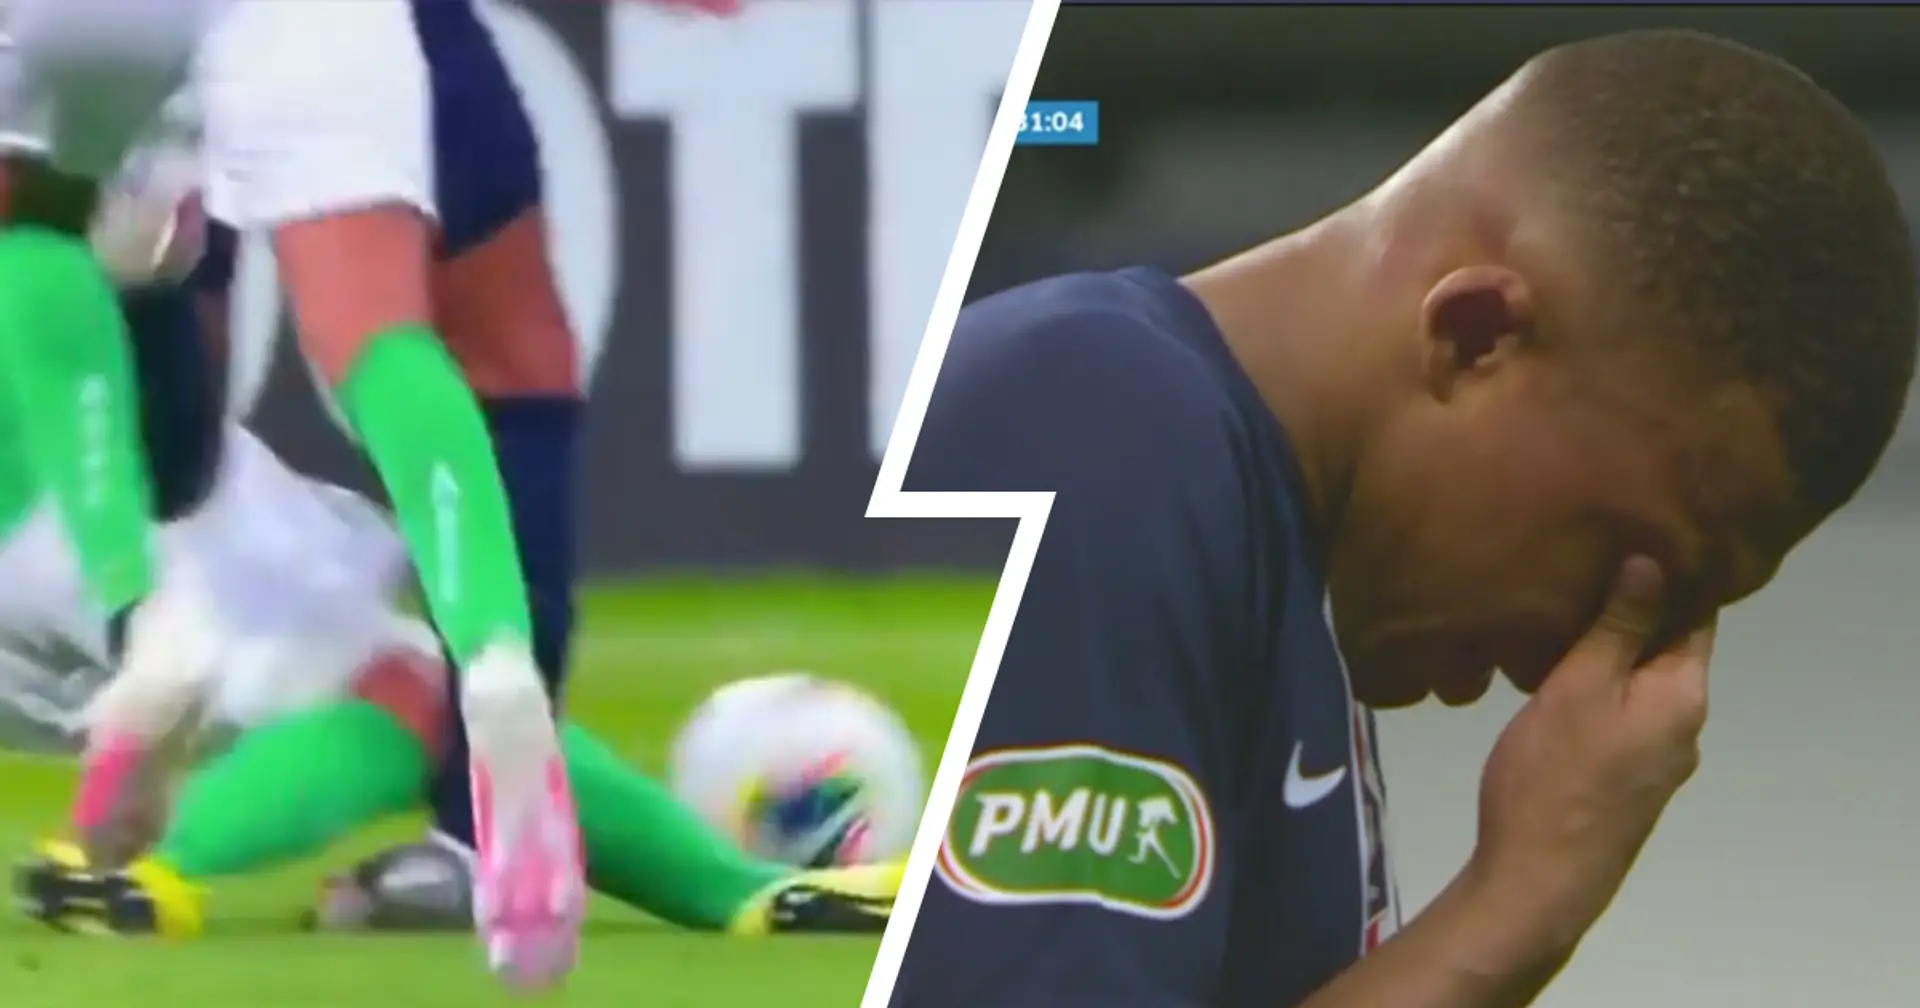 'It went crack': Kylian Mbappe confides after horrifying injury but shuts down talk of ankle fracture